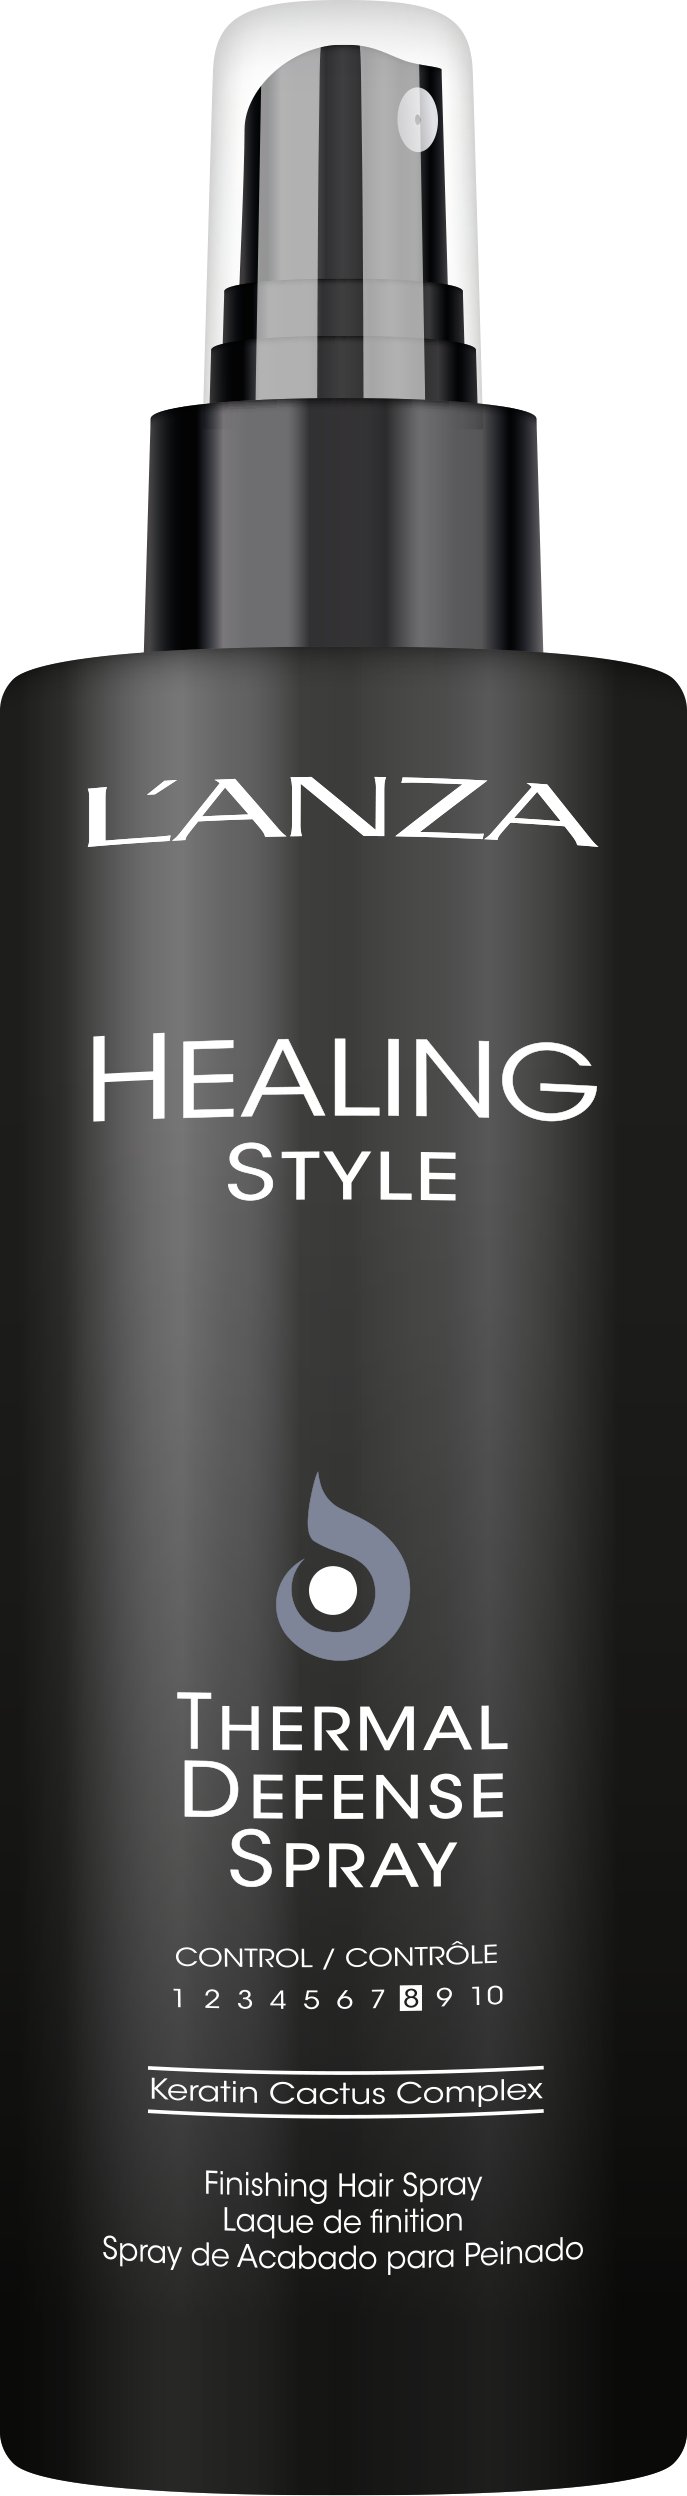 L'ANZA Healing Style Thermal Defense Spray